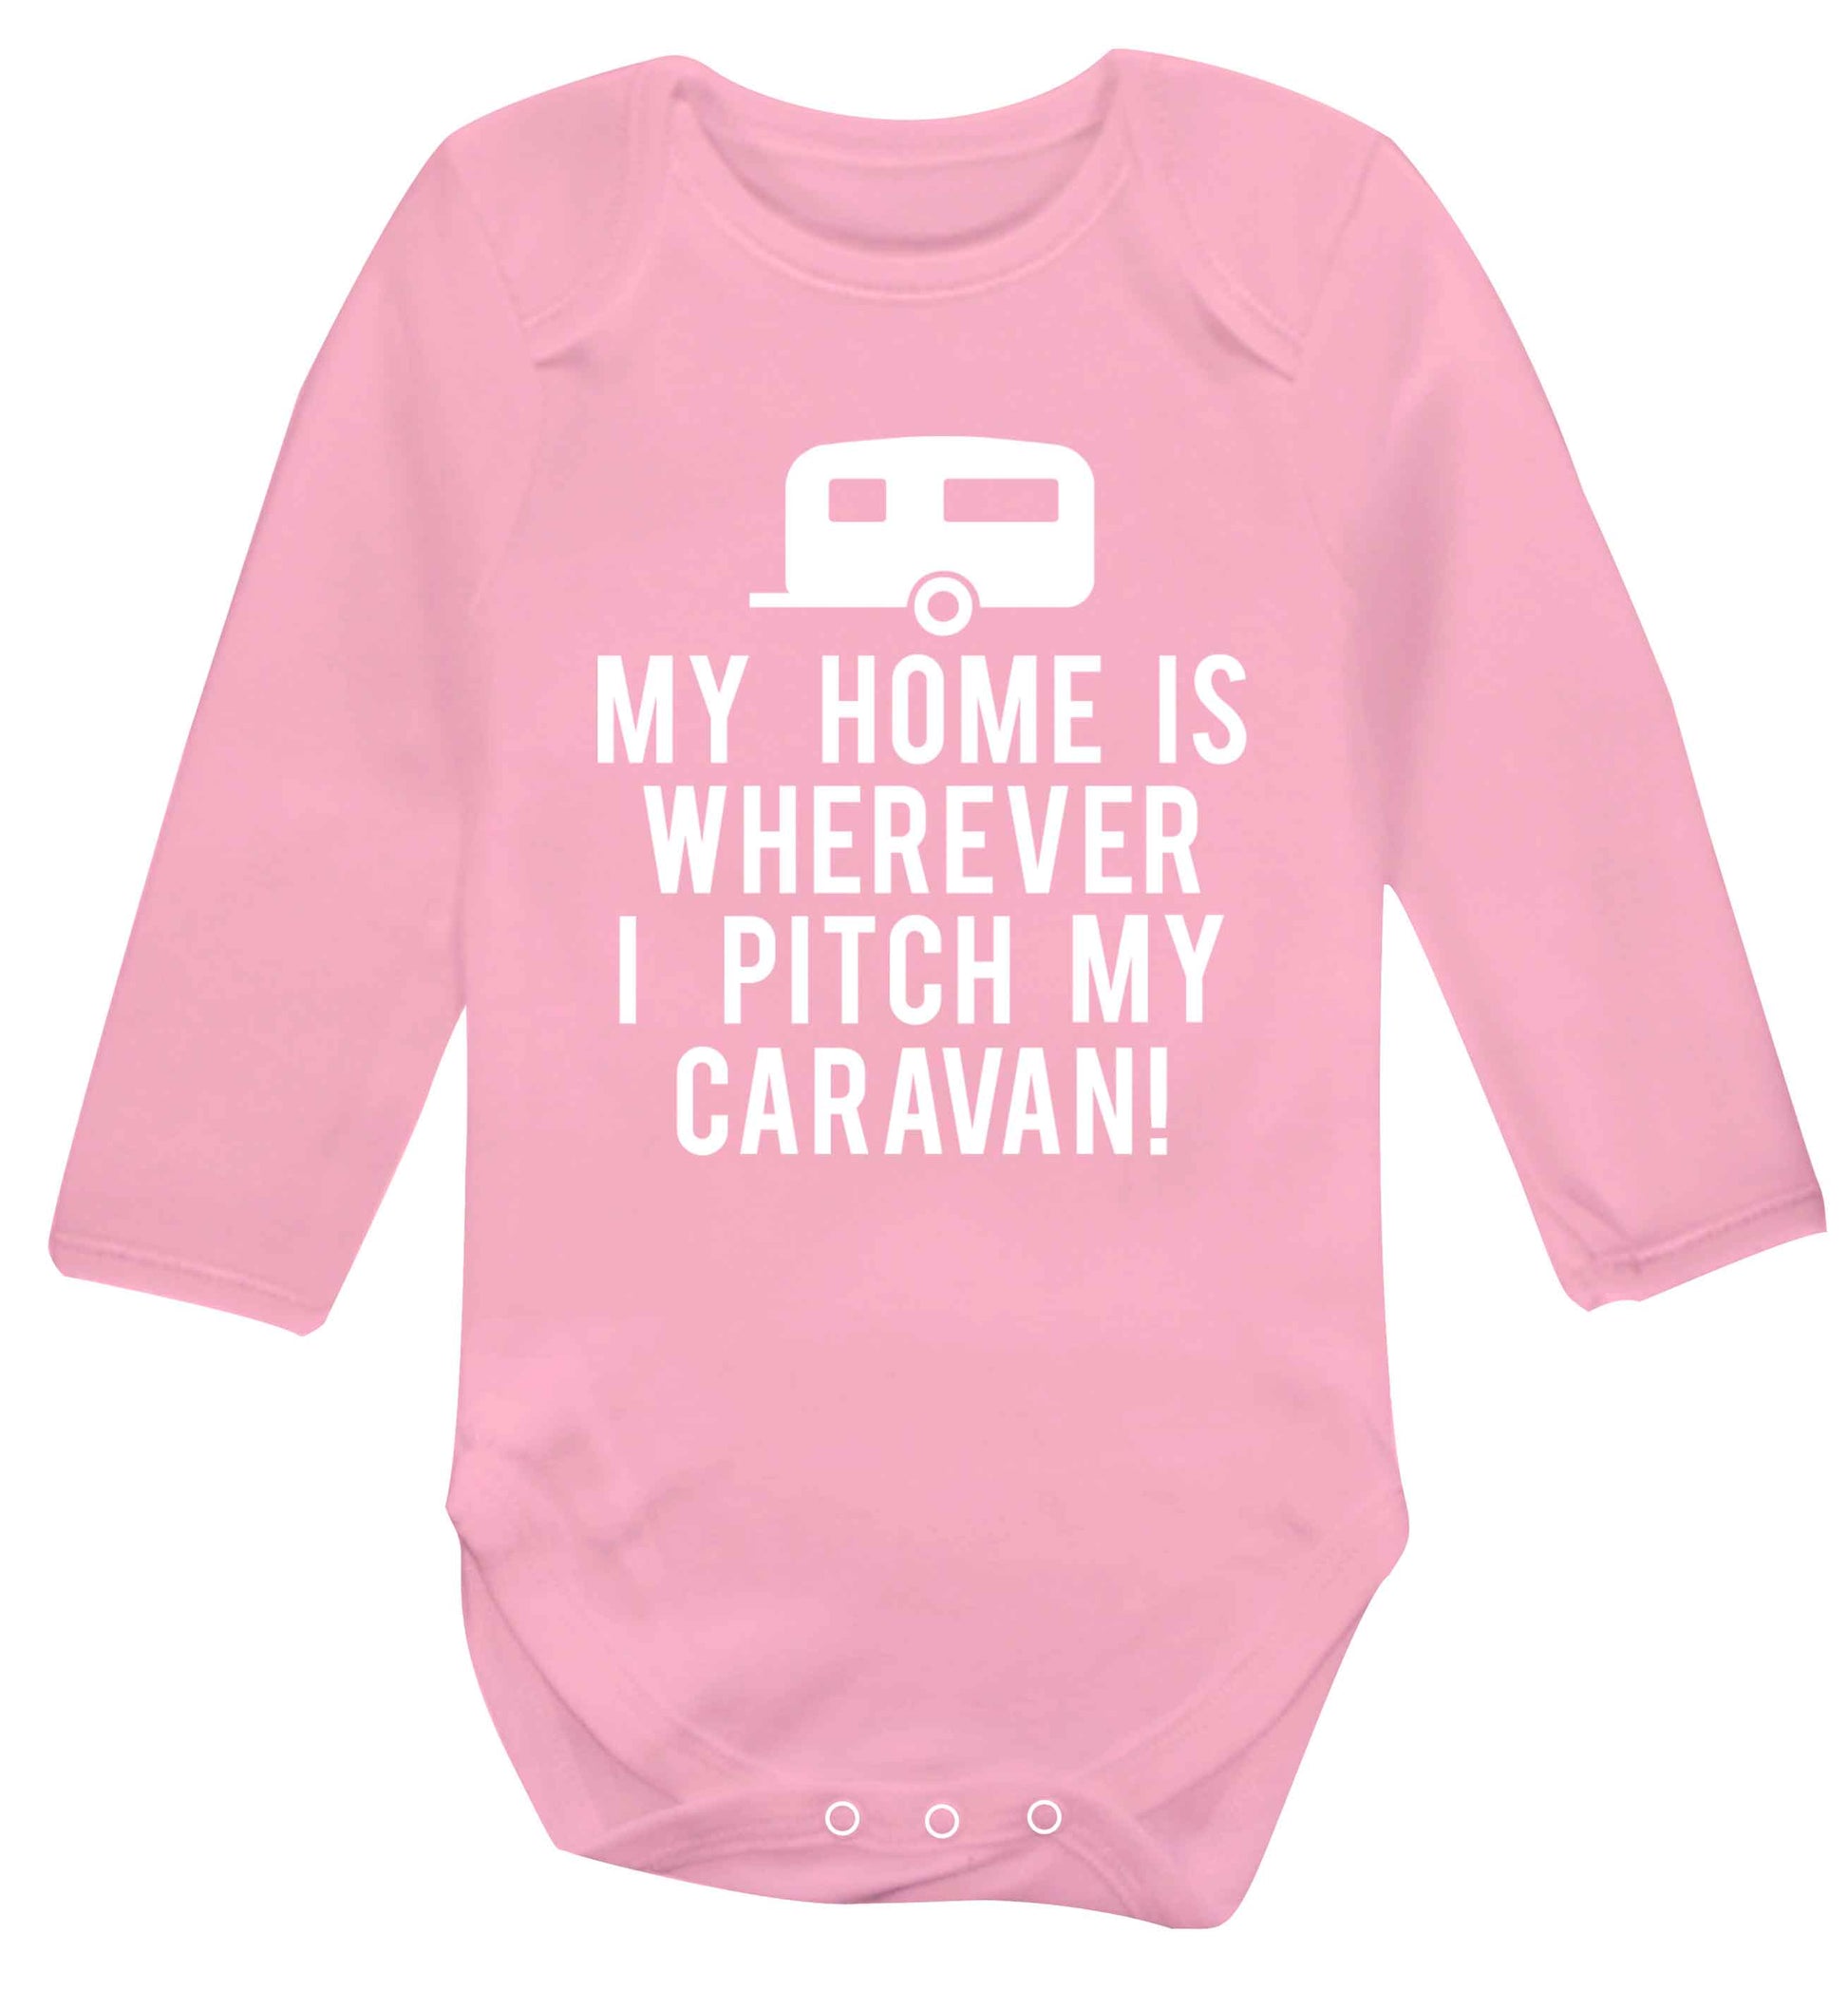 My home is wherever I pitch my caravan Baby Vest long sleeved pale pink 6-12 months